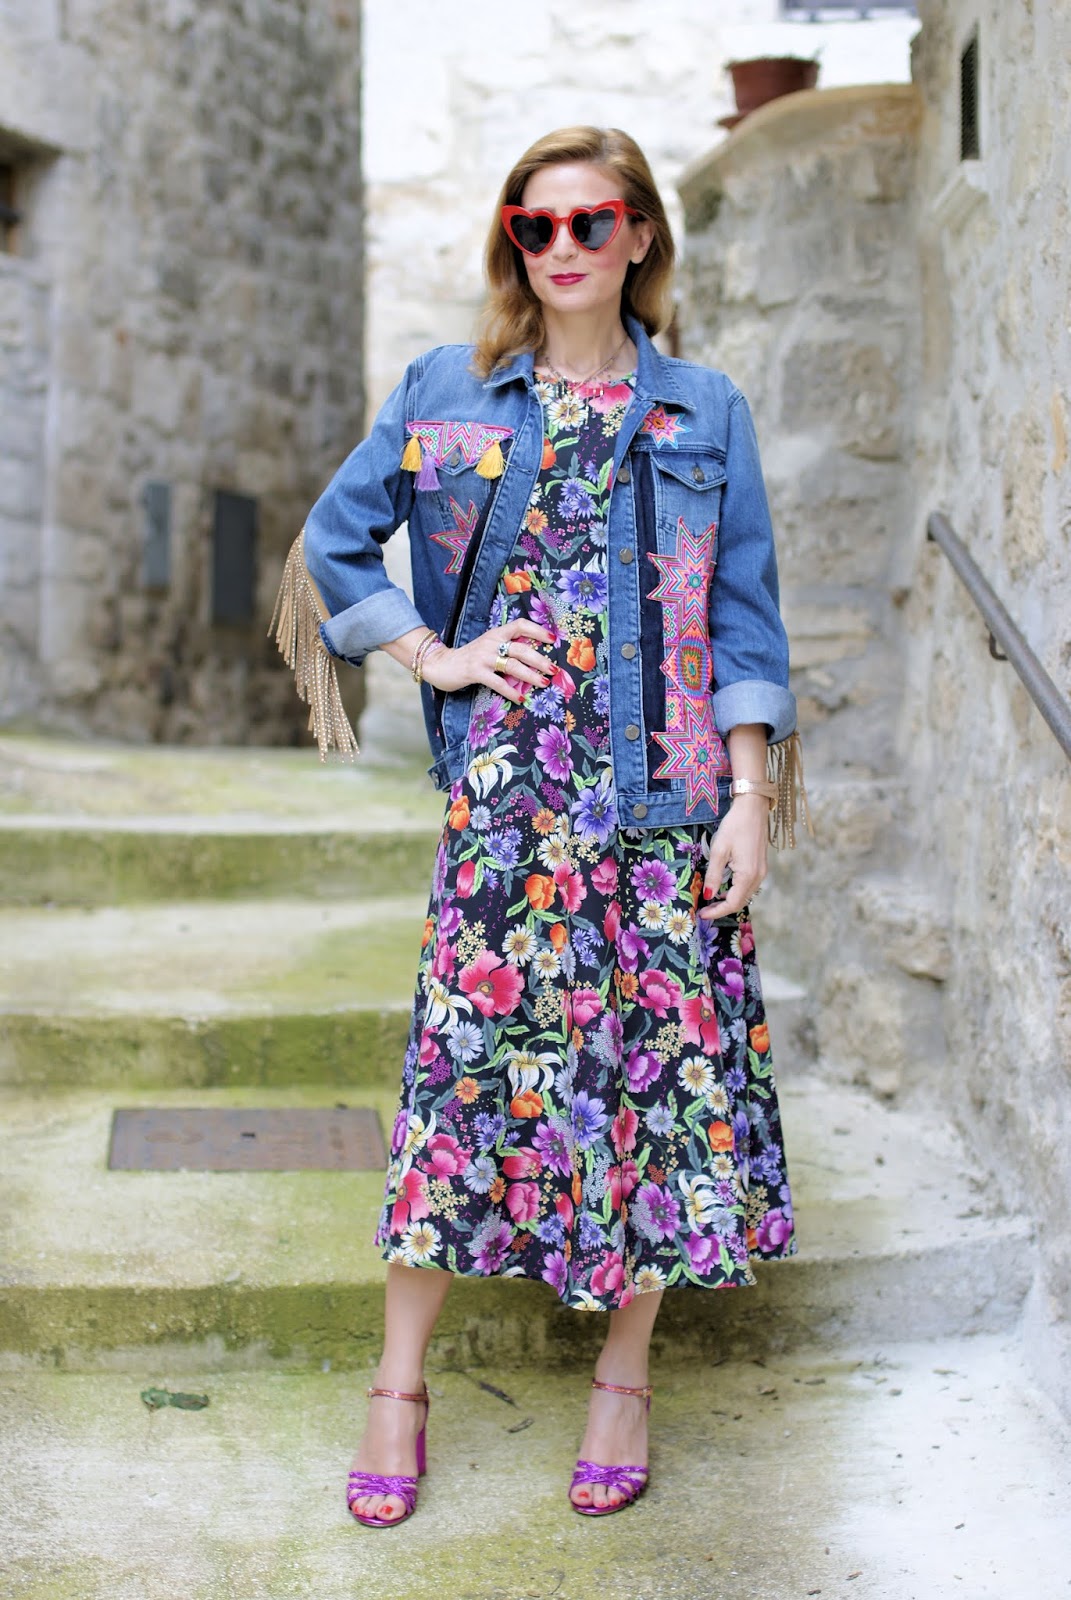 Flower Power: Hippy glam inspiration on Fashion and Cookies fashion blog, fashion blogger style